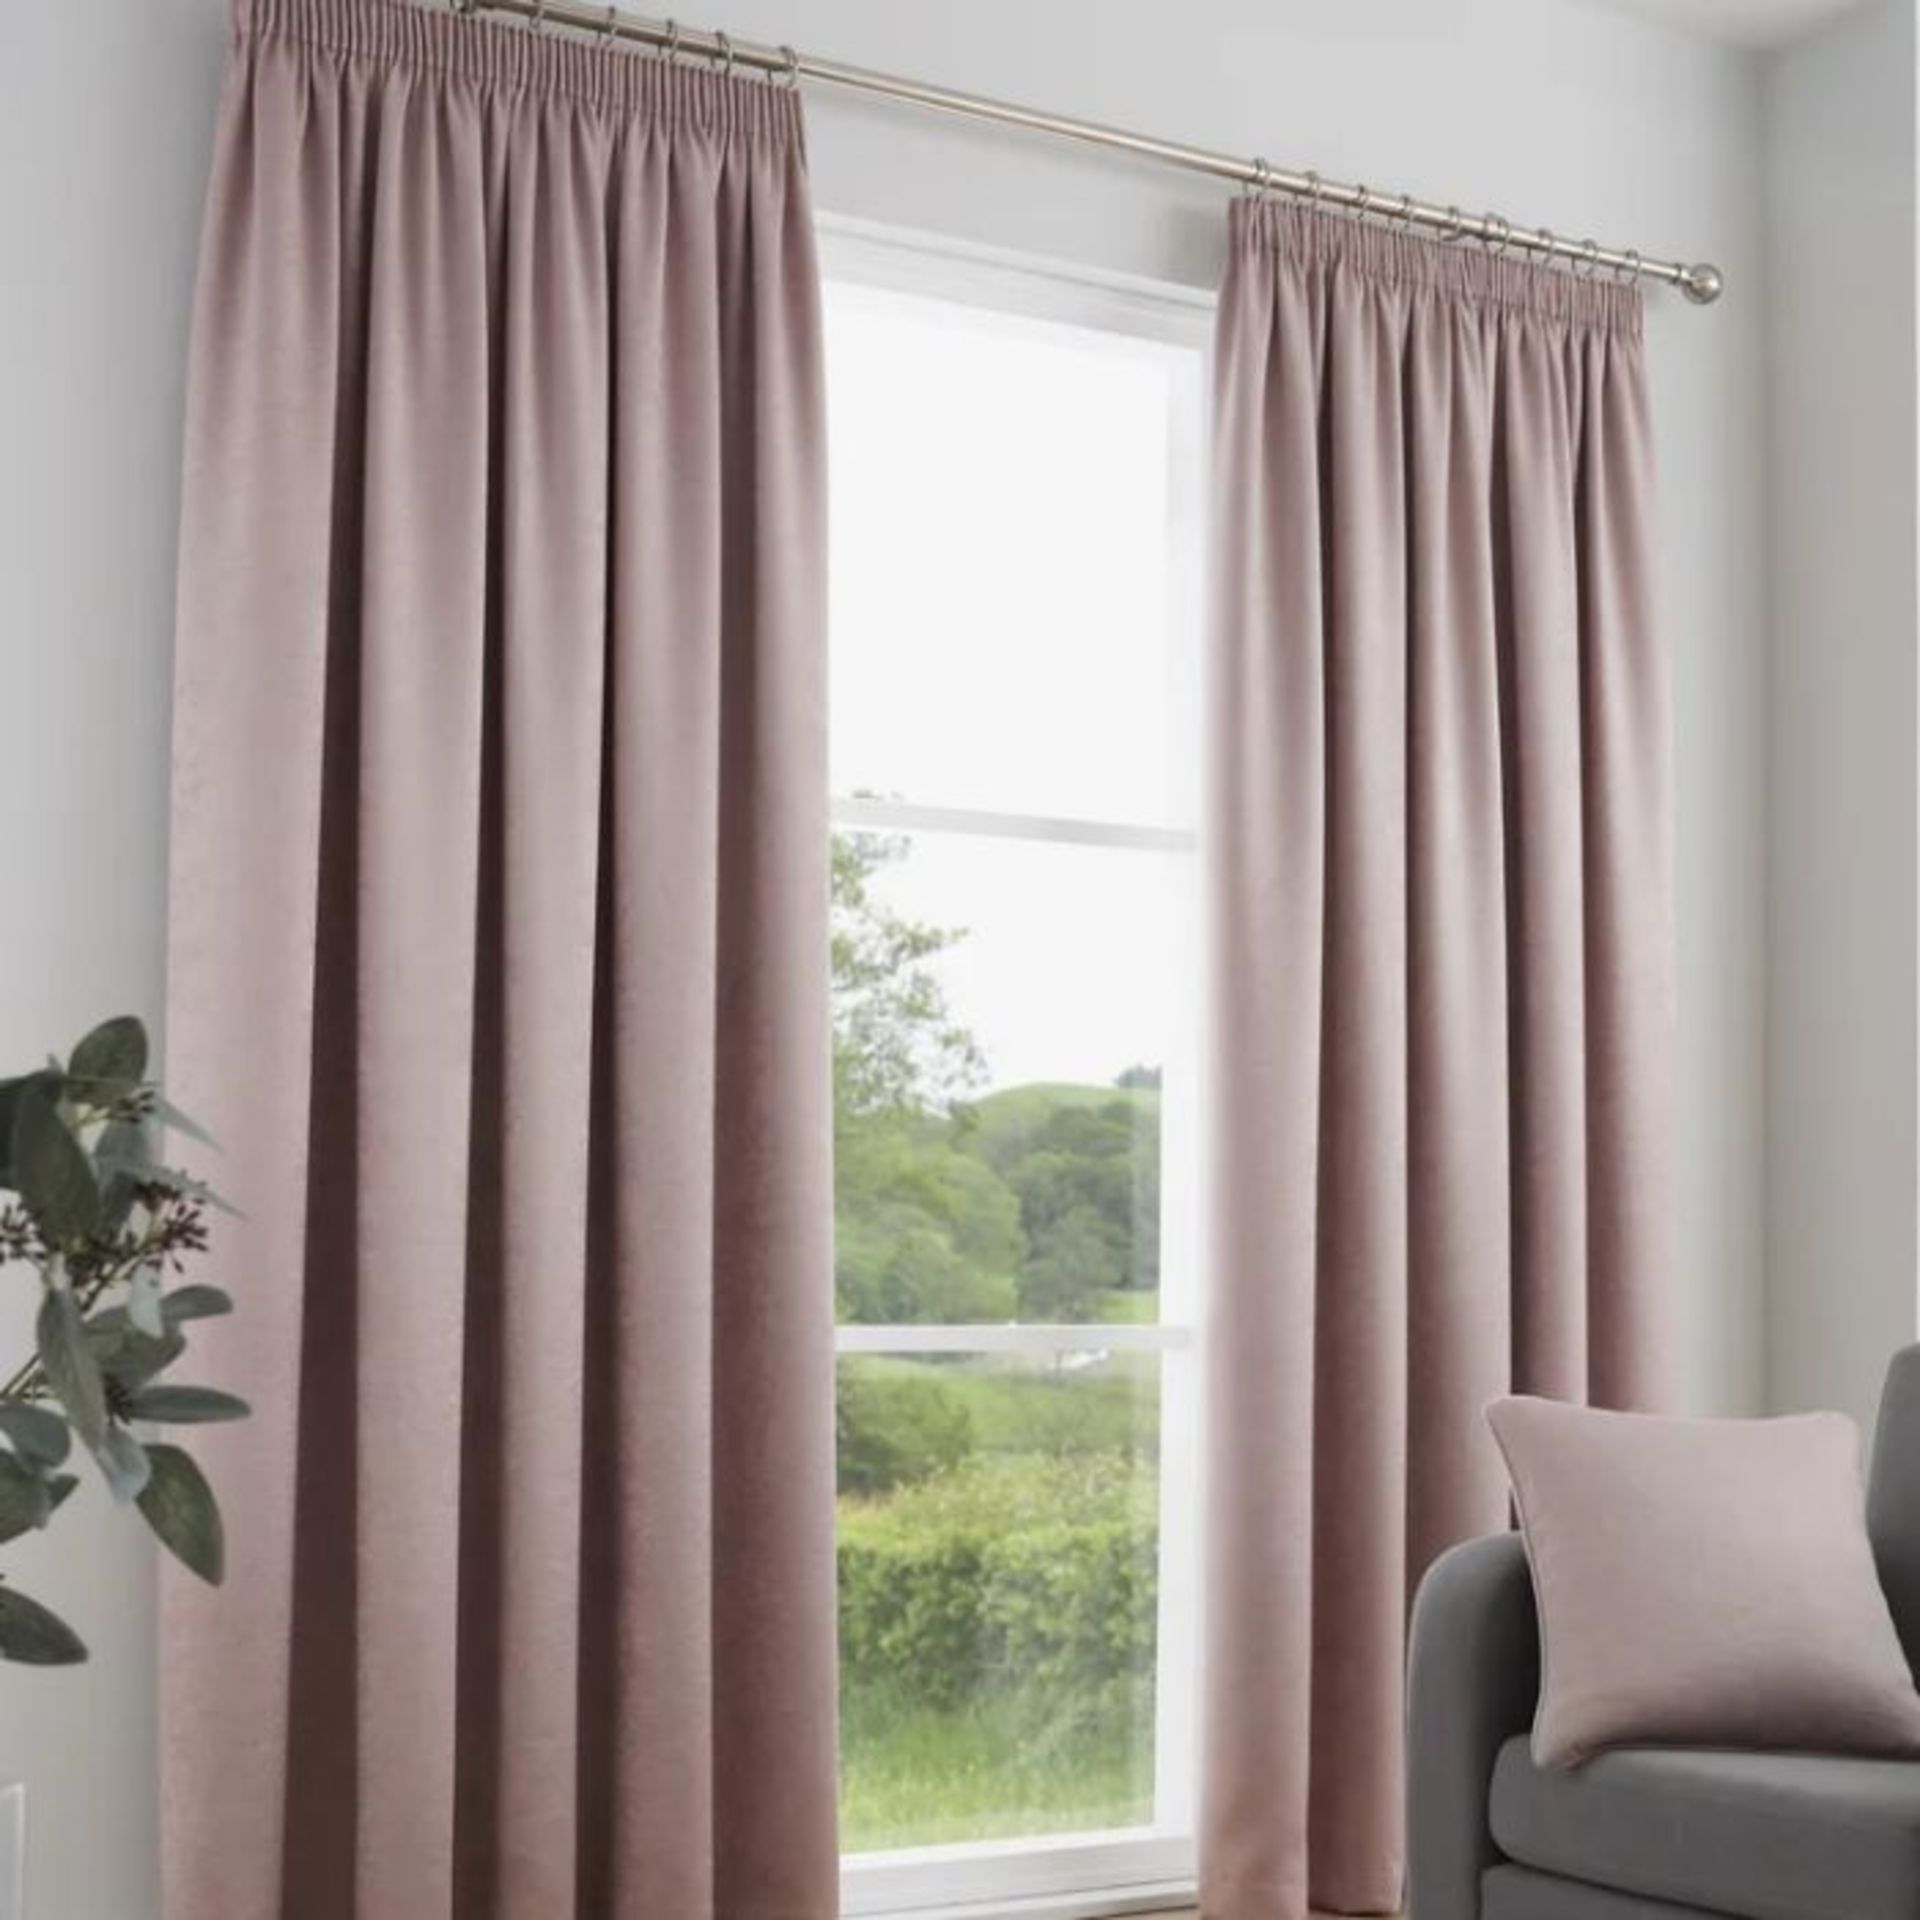 Ebern Designs, Carianna Self Lined Pair Of Eyelet Curtains By Ebern Designs (BLUSH) (168 W x 137 D